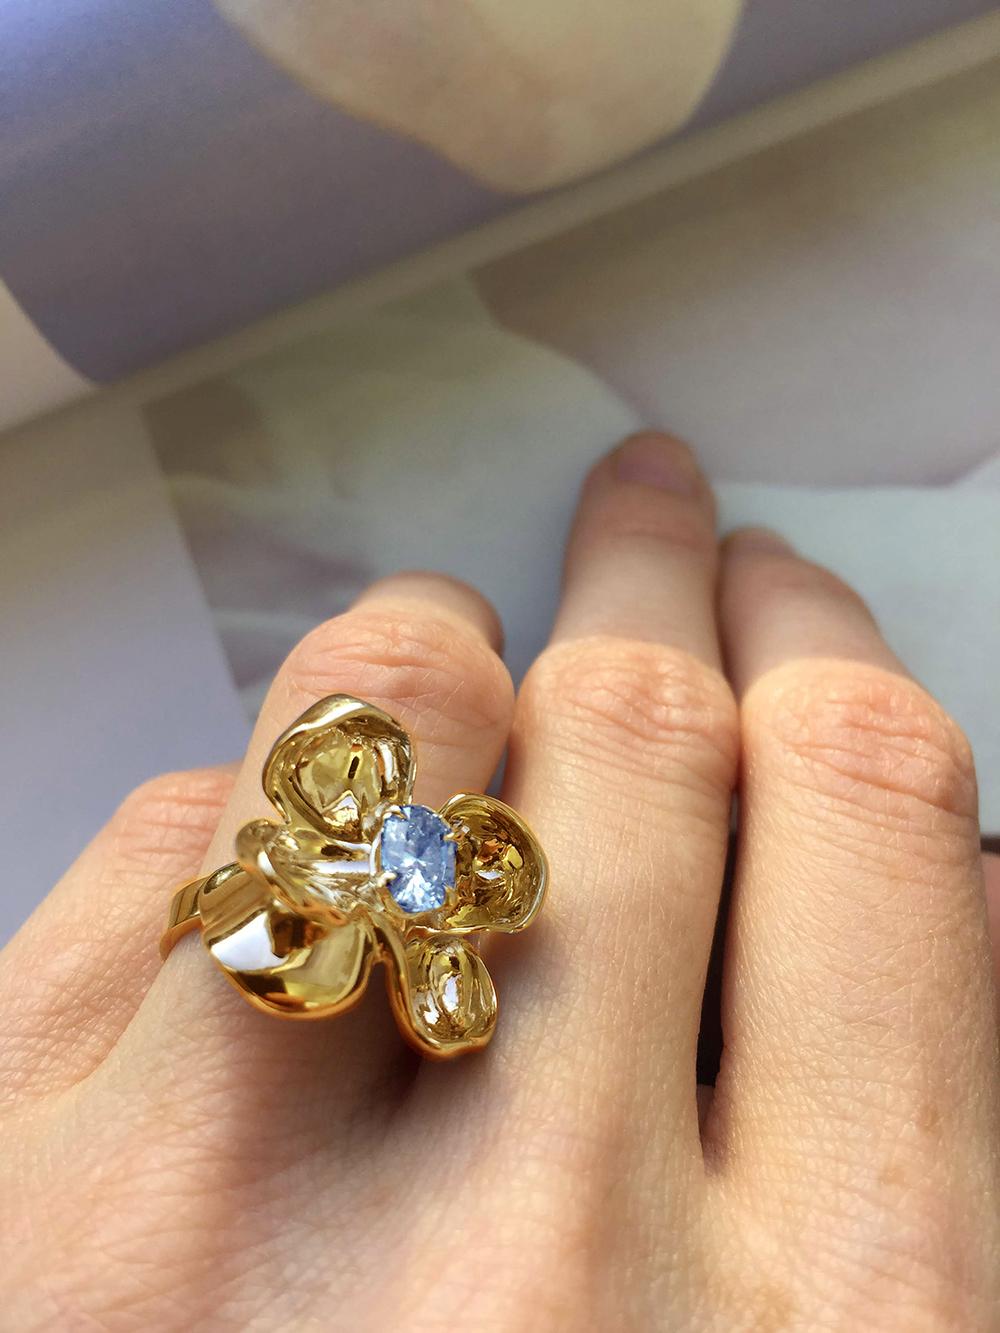 This Magnolia Flower contemporary engagement or cocktail ring is made of 18 karat yellow gold and features a clear and shiny light blue sapphire weighing 0.65 carats. The water-like surface of the gem multiplies the light, mirroring on the golden